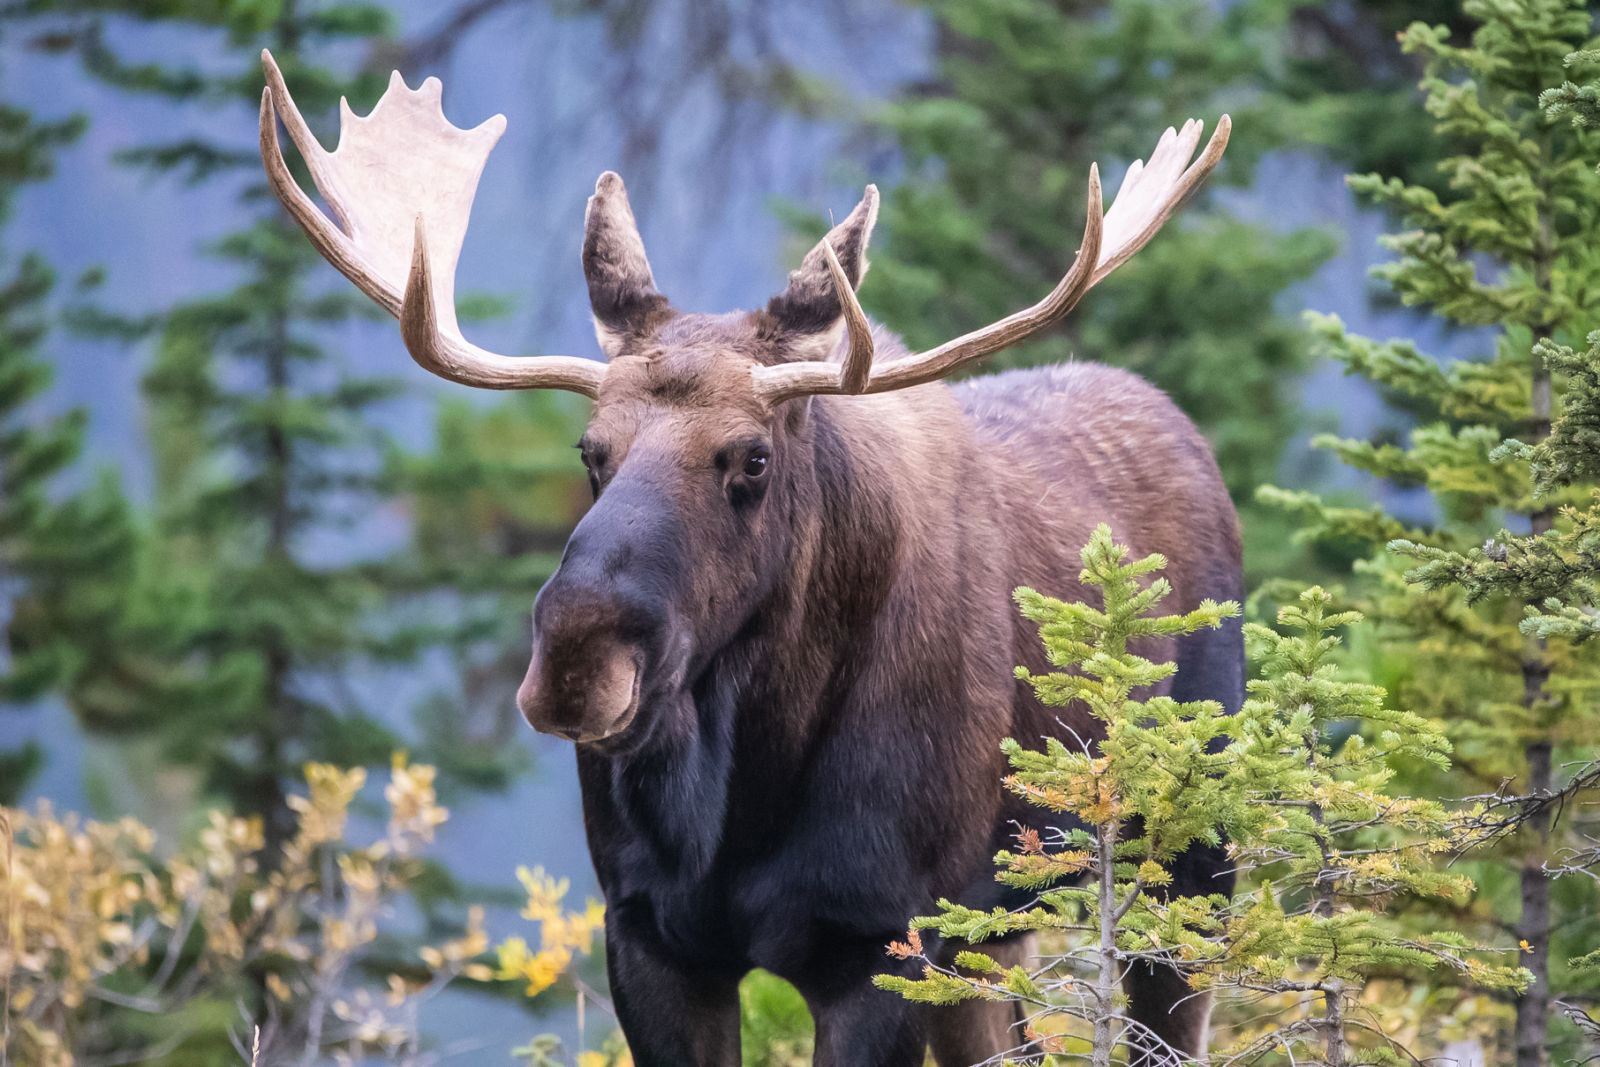 Bull moose with antlers